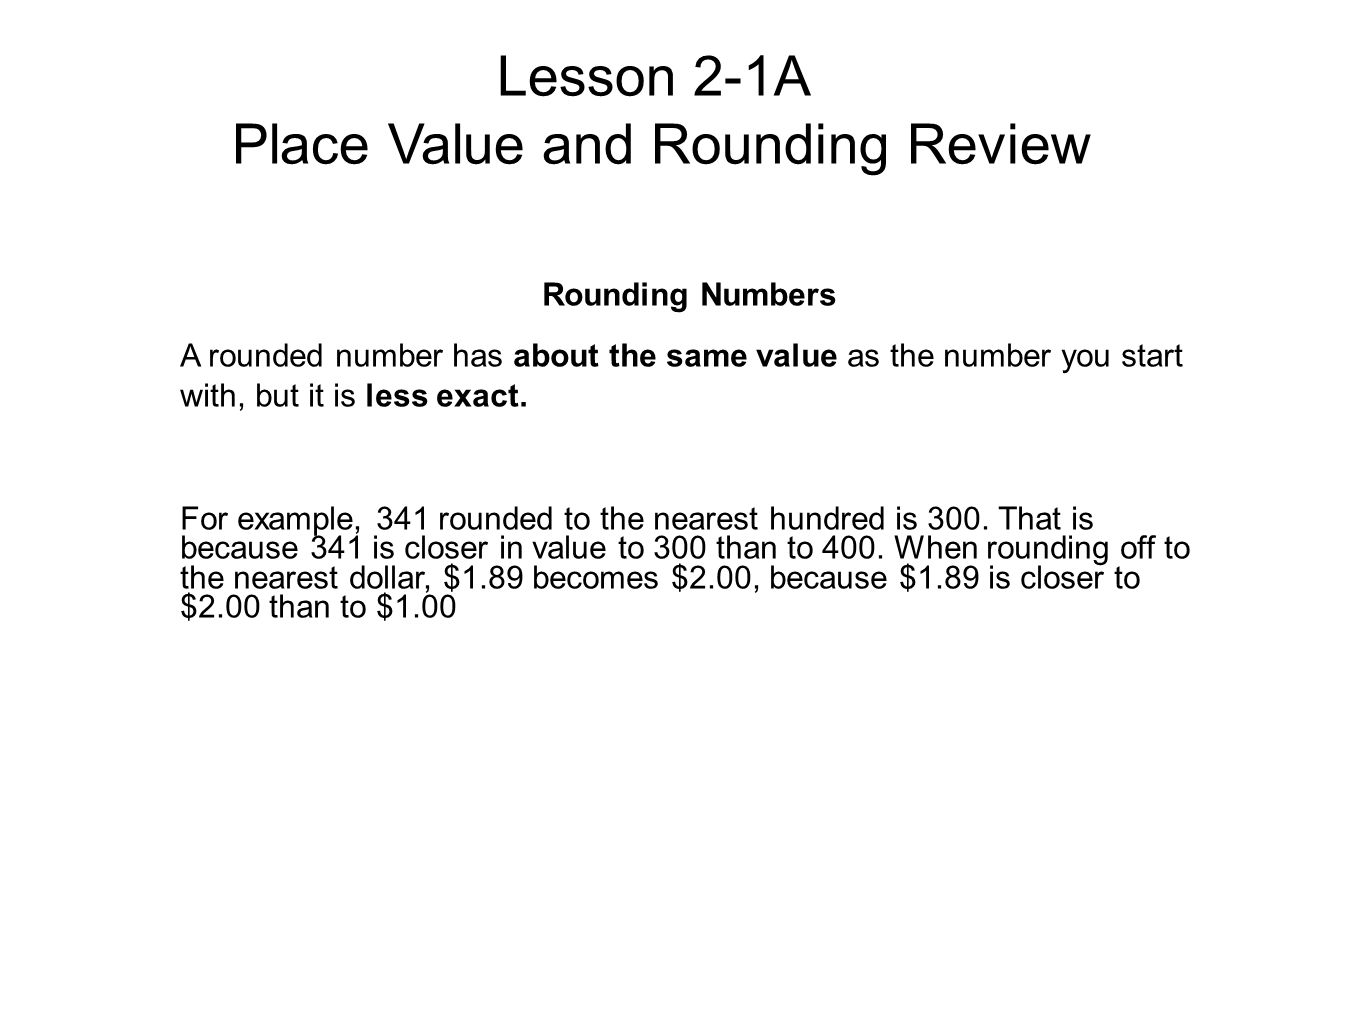 Lesson 2-1A Place Value and Rounding Review Rounding Numbers A rounded number has about the same value as the number you start with, but it is less exact.